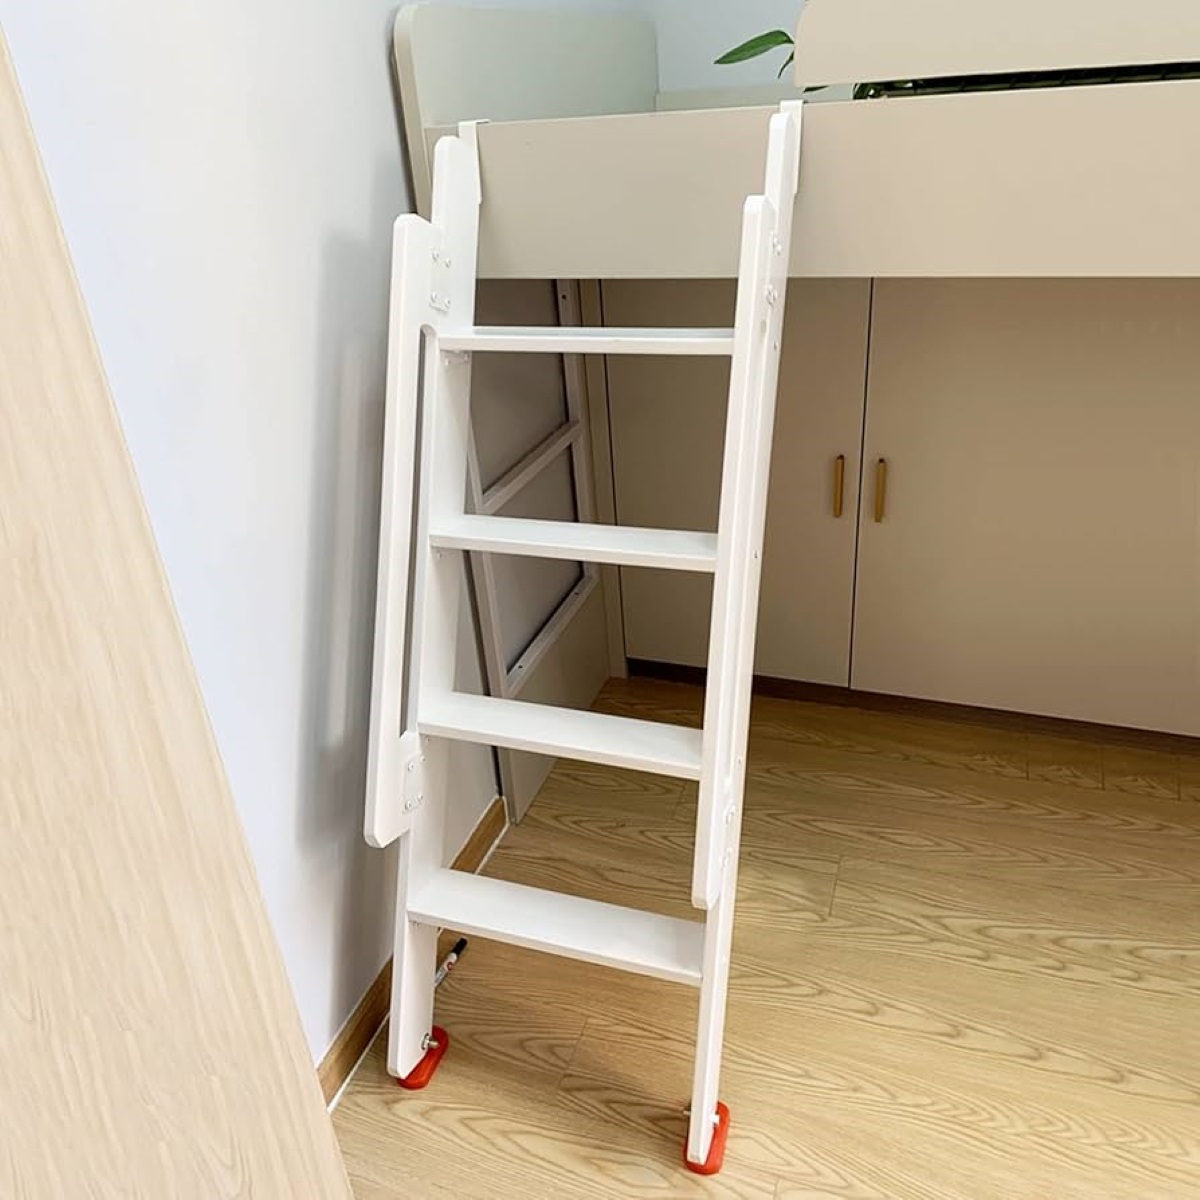 Where Can I Buy A Bunk Bed Ladder